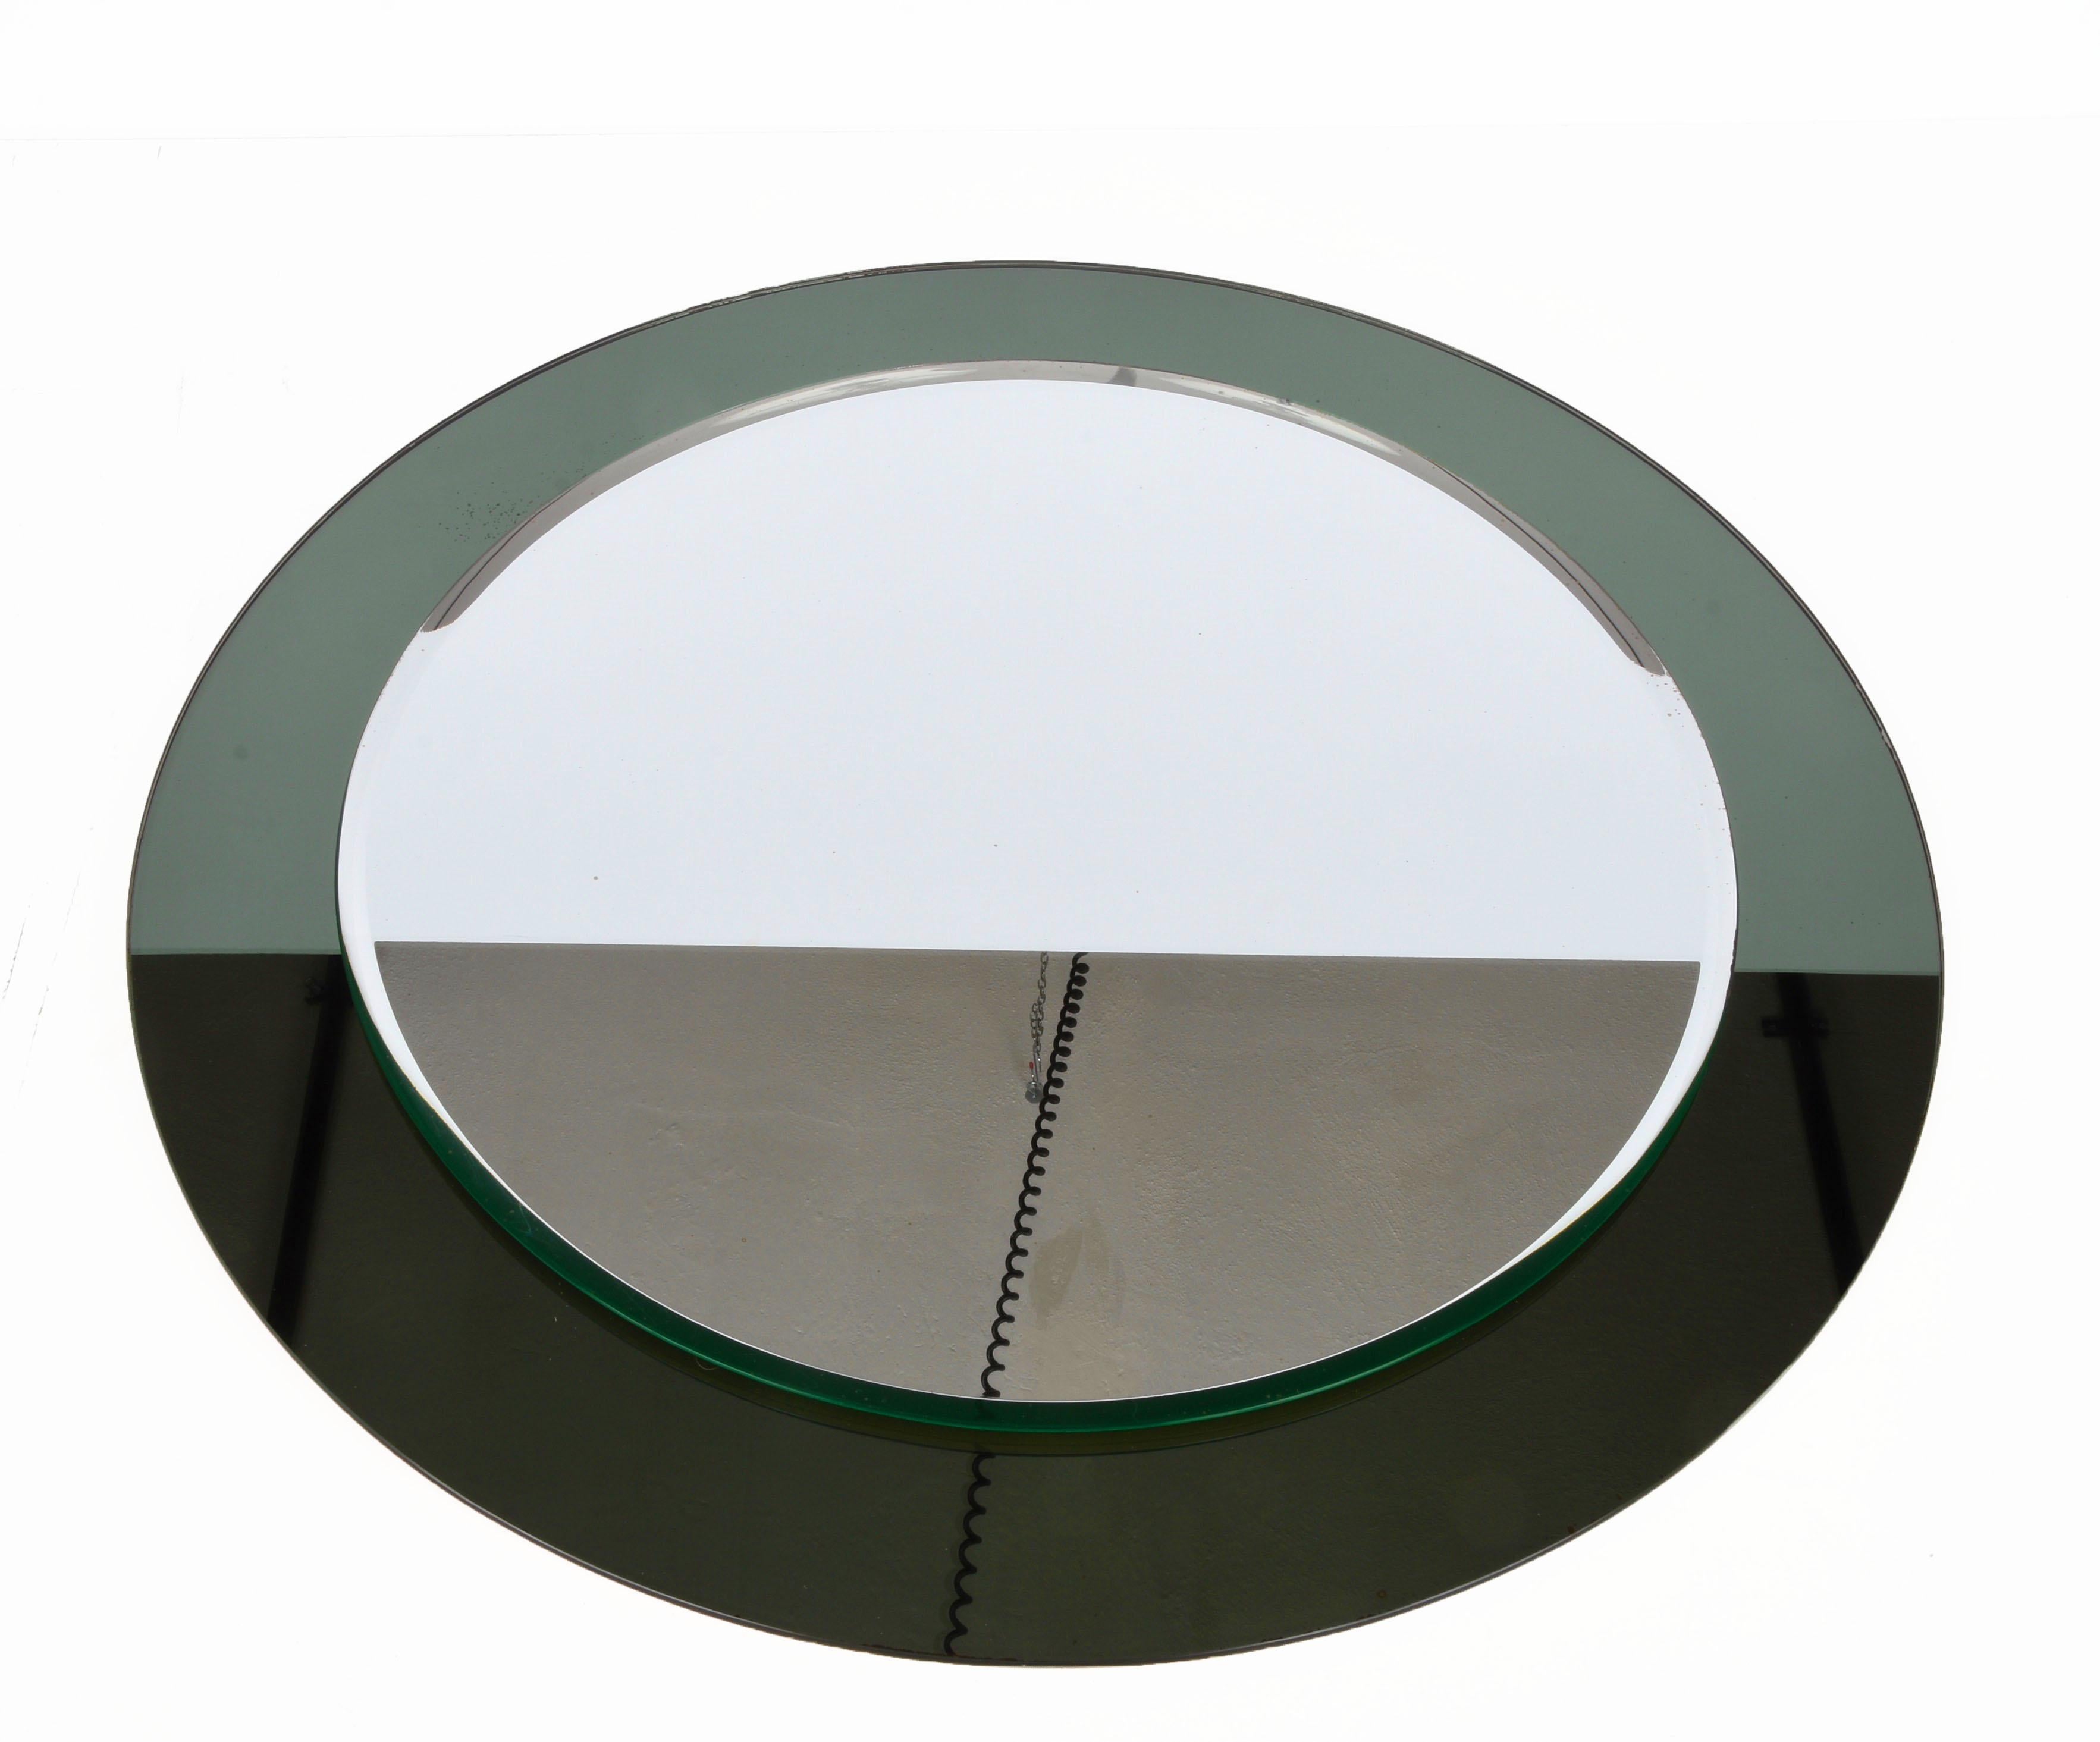 Amazing midcentury round mirror with a double frame. This fantastic item was designed by Paleari Milano in Italy in the 1960s and produced by Cristal Art.

This piece is gorgeous as it has an elegant olive green smoked mirror frame. The contrast